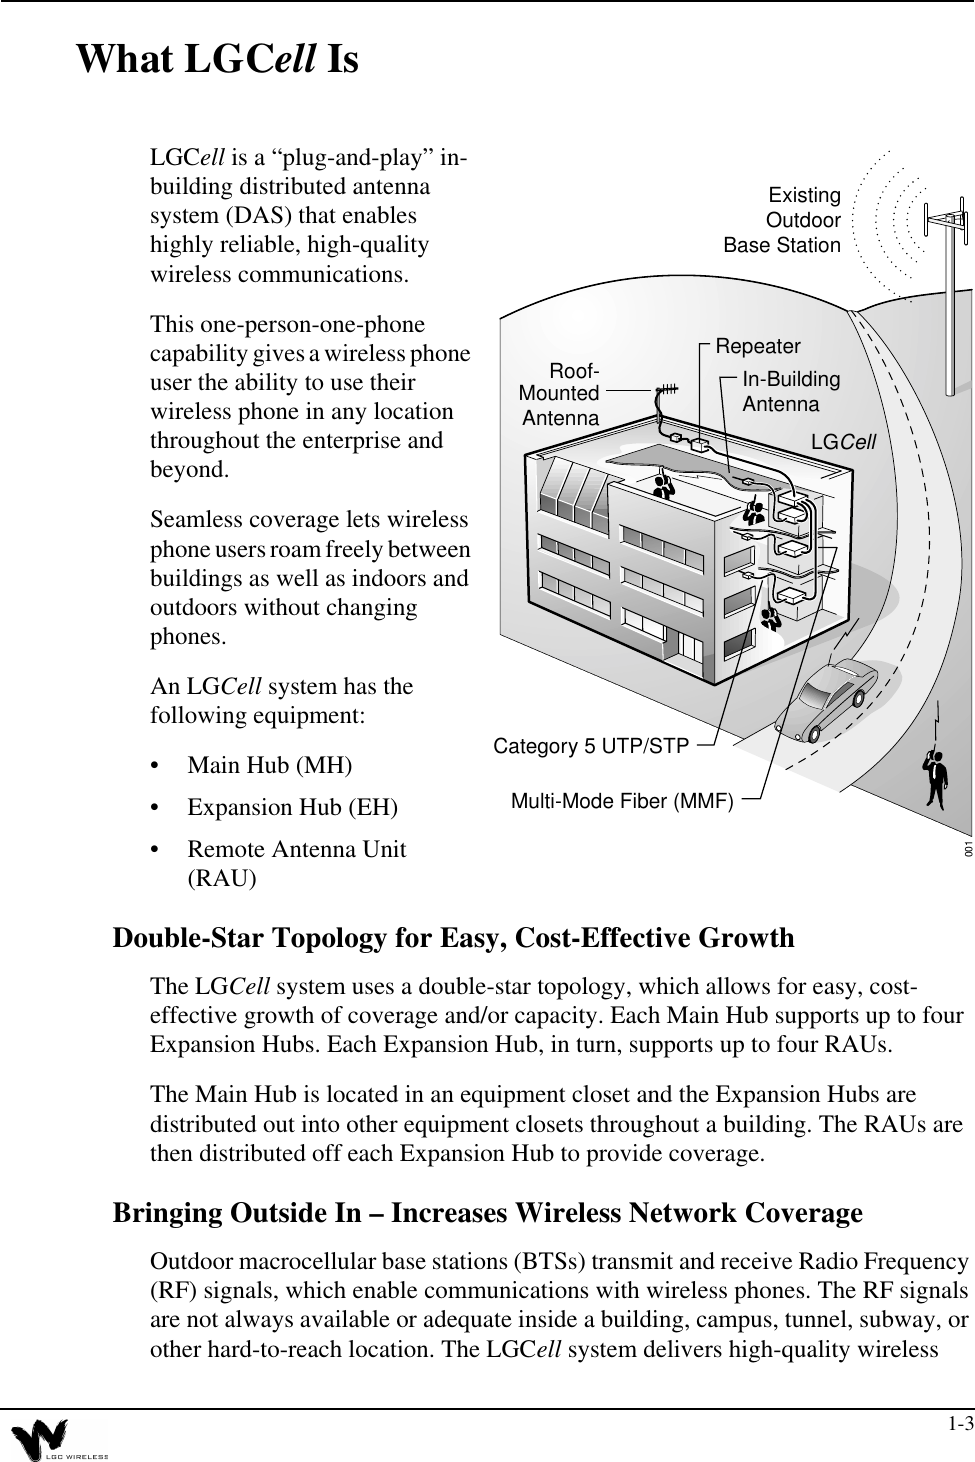 1-3What LGCell IsLGCell is a “plug-and-play” in-building distributed antenna system (DAS) that enables highly reliable, high-quality wireless communications.This one-person-one-phone capability gives a wireless phone user the ability to use their wireless phone in any location throughout the enterprise and beyond.Seamless coverage lets wireless phone users roam freely between buildings as well as indoors and outdoors without changing phones.An LGCell system has the following equipment:• Main Hub (MH)• Expansion Hub (EH)• Remote Antenna Unit (RAU)Double-Star Topology for Easy, Cost-Effective GrowthThe LGCell system uses a double-star topology, which allows for easy, cost-effective growth of coverage and/or capacity. Each Main Hub supports up to four Expansion Hubs. Each Expansion Hub, in turn, supports up to four RAUs.The Main Hub is located in an equipment closet and the Expansion Hubs are distributed out into other equipment closets throughout a building. The RAUs are then distributed off each Expansion Hub to provide coverage.Bringing Outside In – Increases Wireless Network CoverageOutdoor macrocellular base stations (BTSs) transmit and receive Radio Frequency (RF) signals, which enable communications with wireless phones. The RF signals are not always available or adequate inside a building, campus, tunnel, subway, or other hard-to-reach location. The LGCell system delivers high-quality wireless  Multi-Mode Fiber (MMF)Roof-001LGCellExistingOutdoorBase StationMountedAntennaCategory 5 UTP/STPIn-BuildingAntennaRepeater